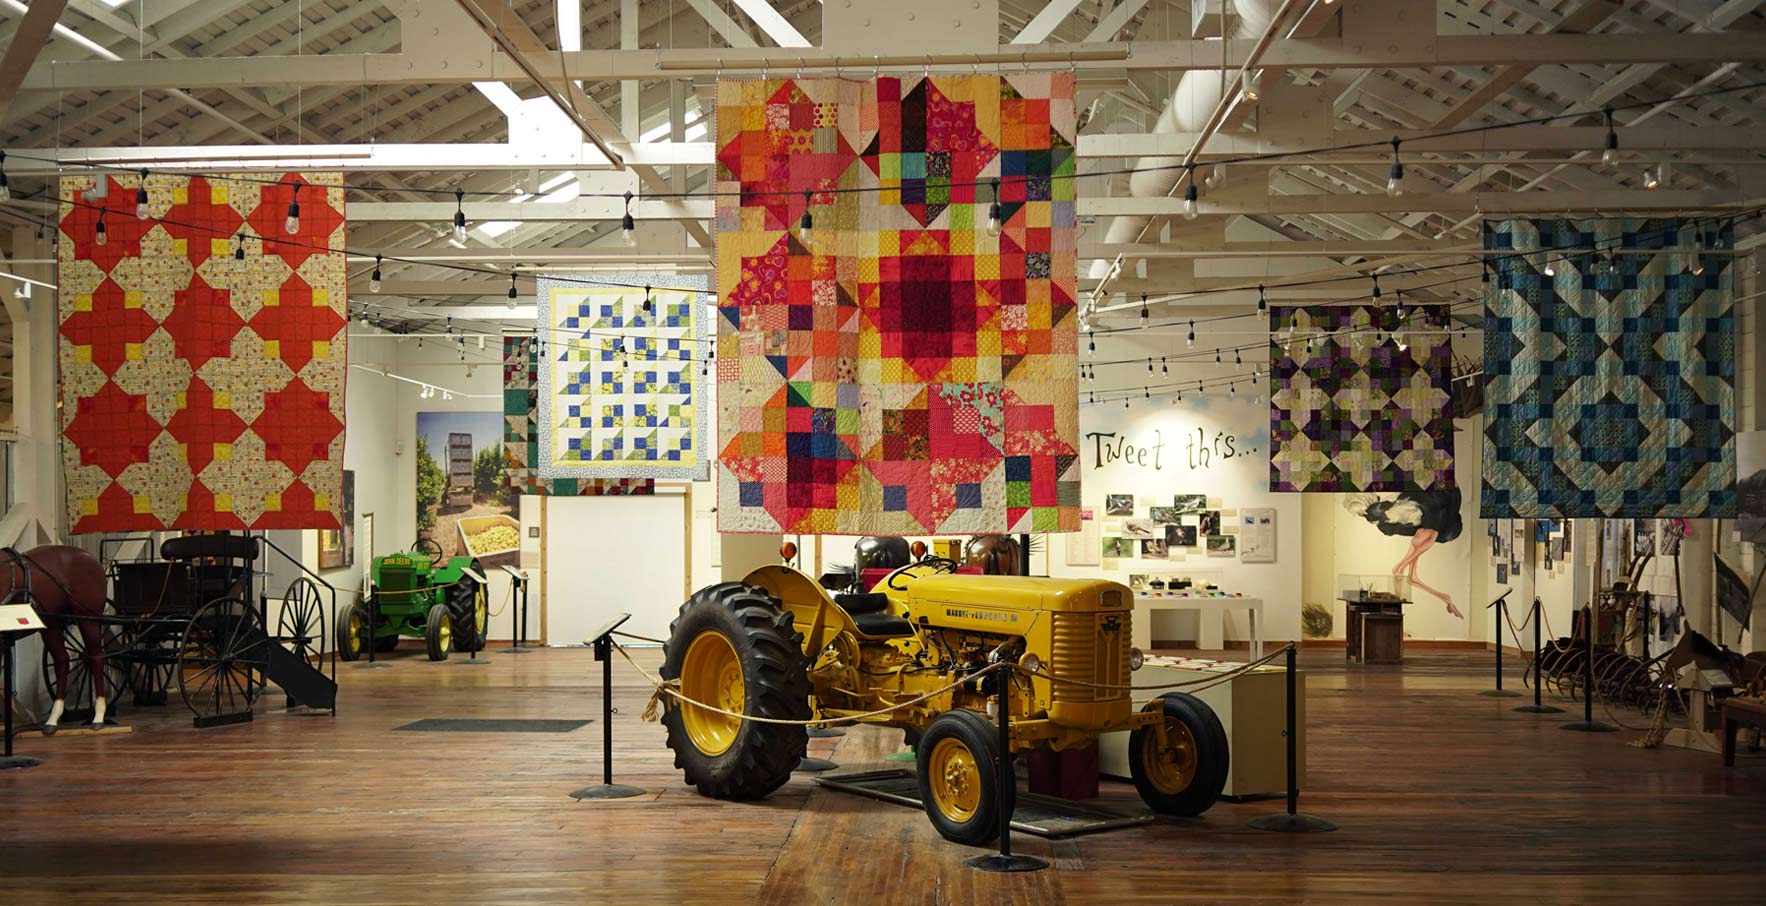 Visit the Agriculture Museum - Museum of Ventura County